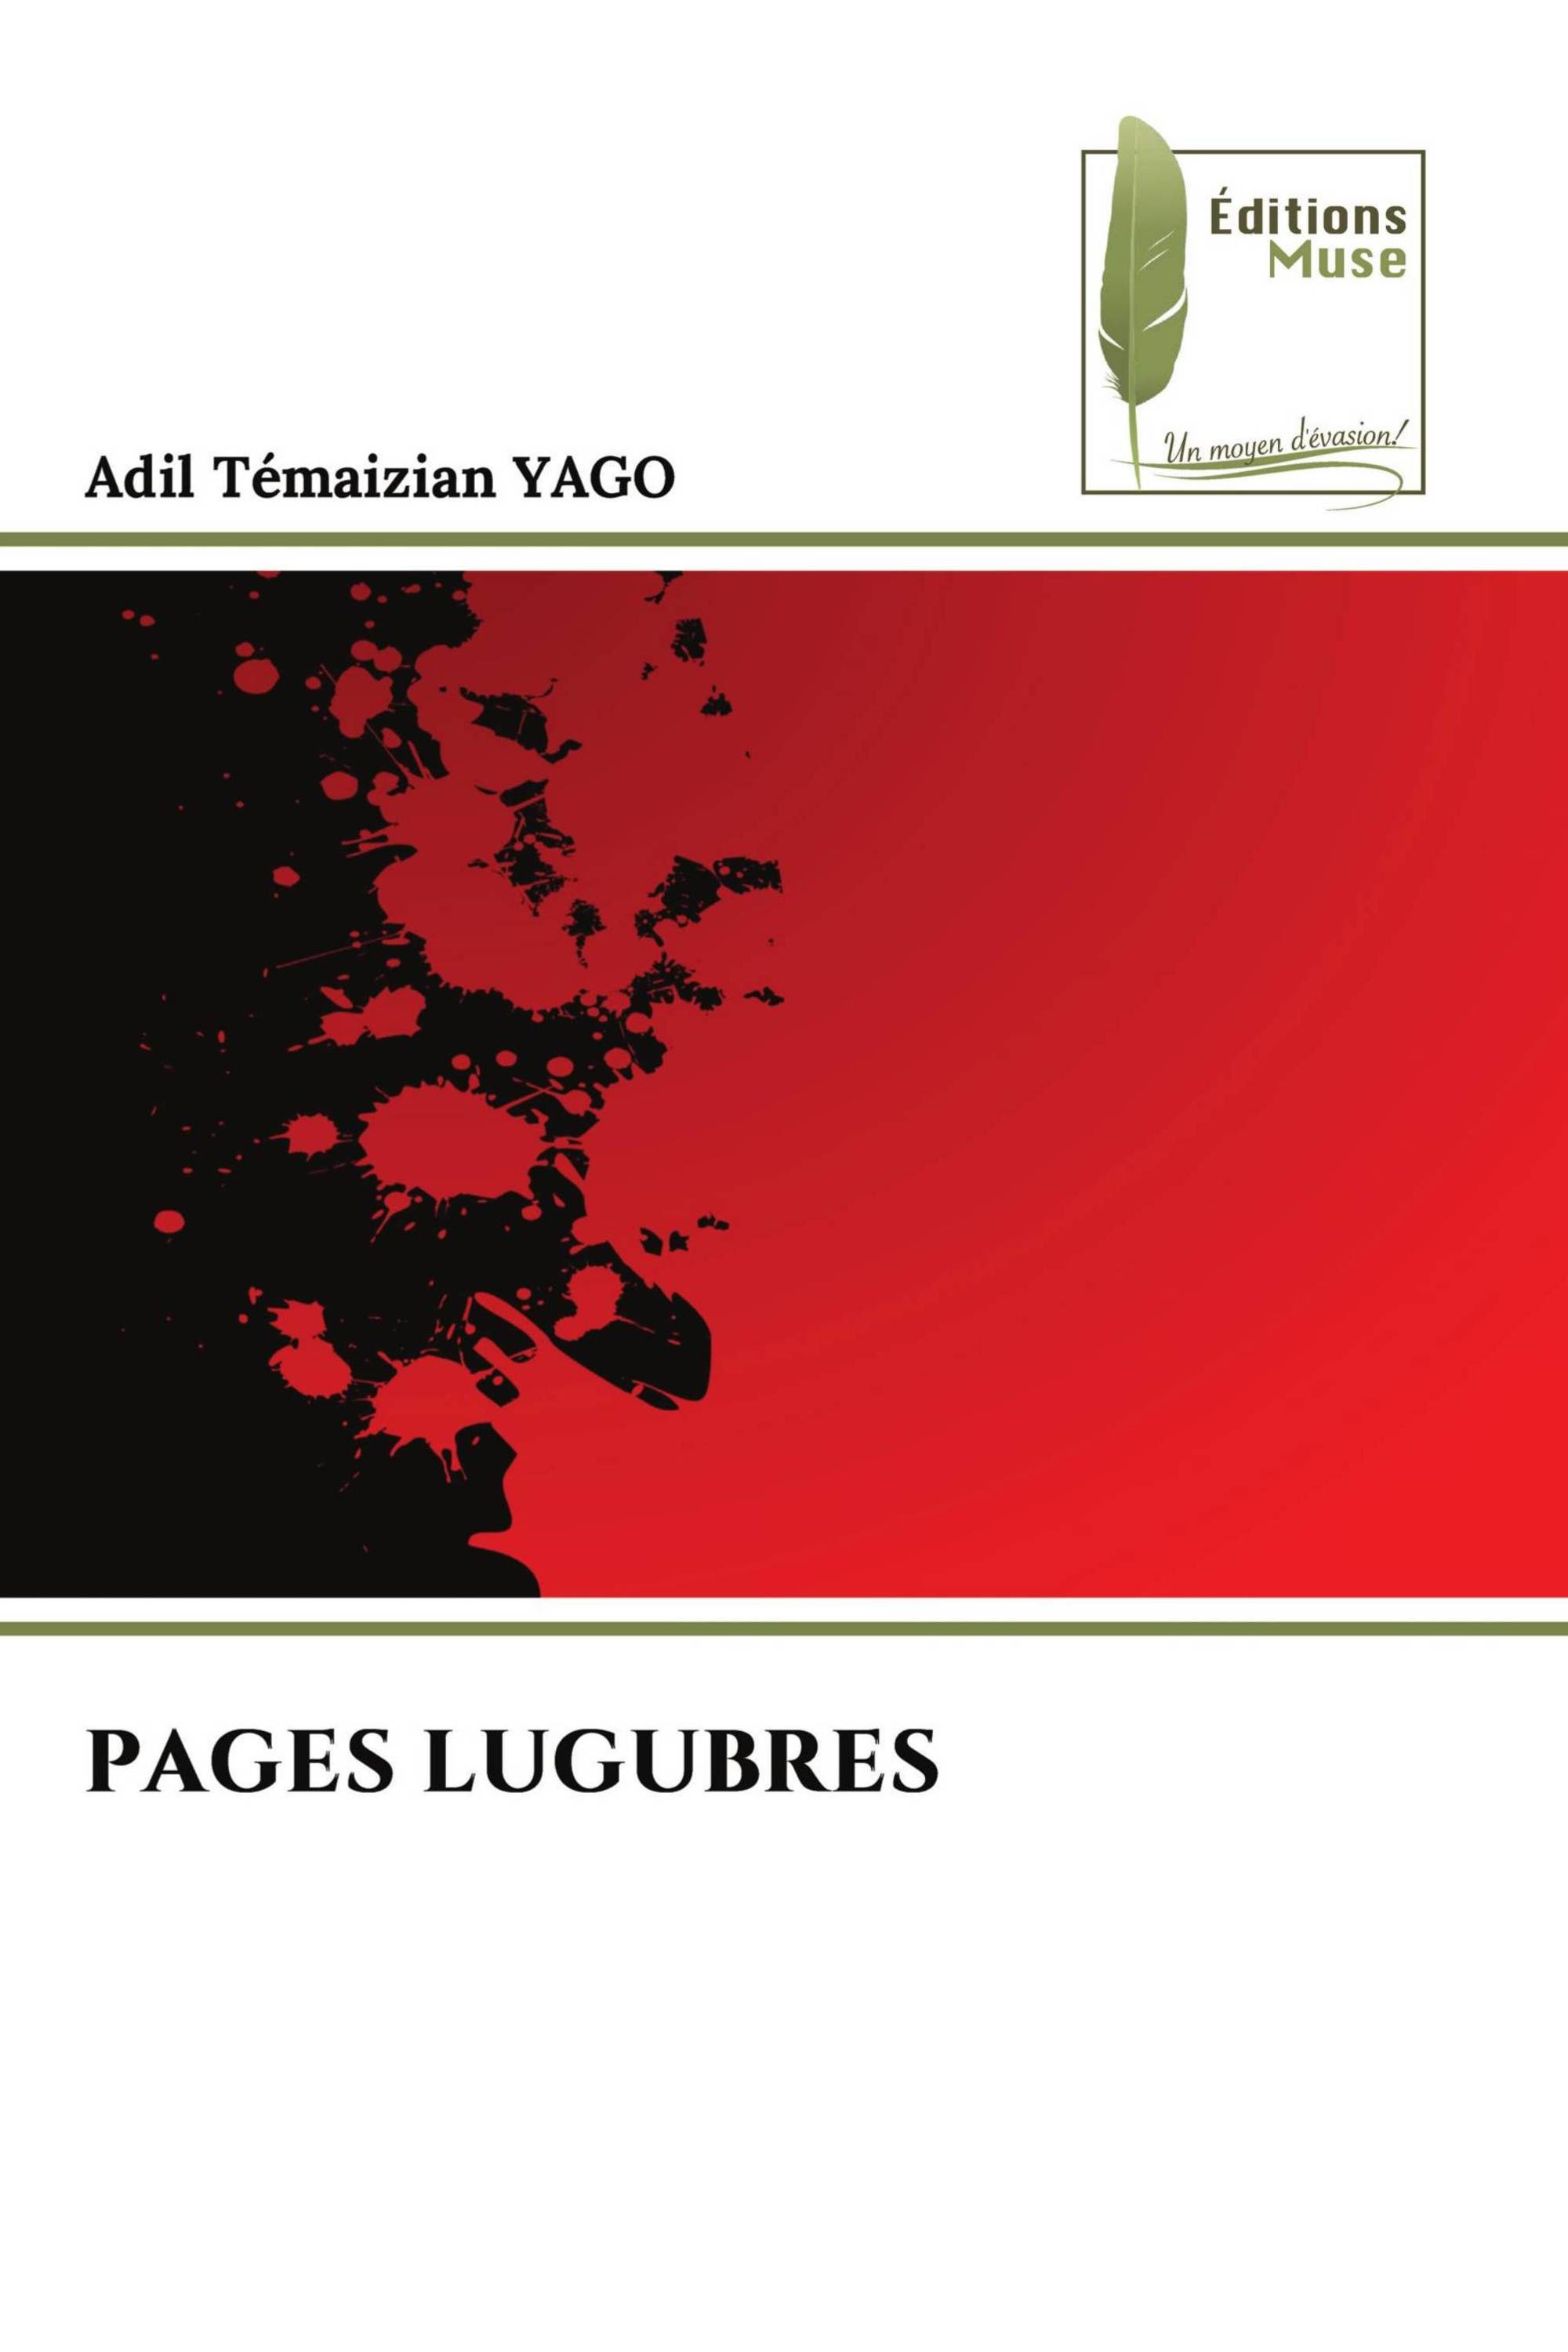 PAGES LUGUBRES